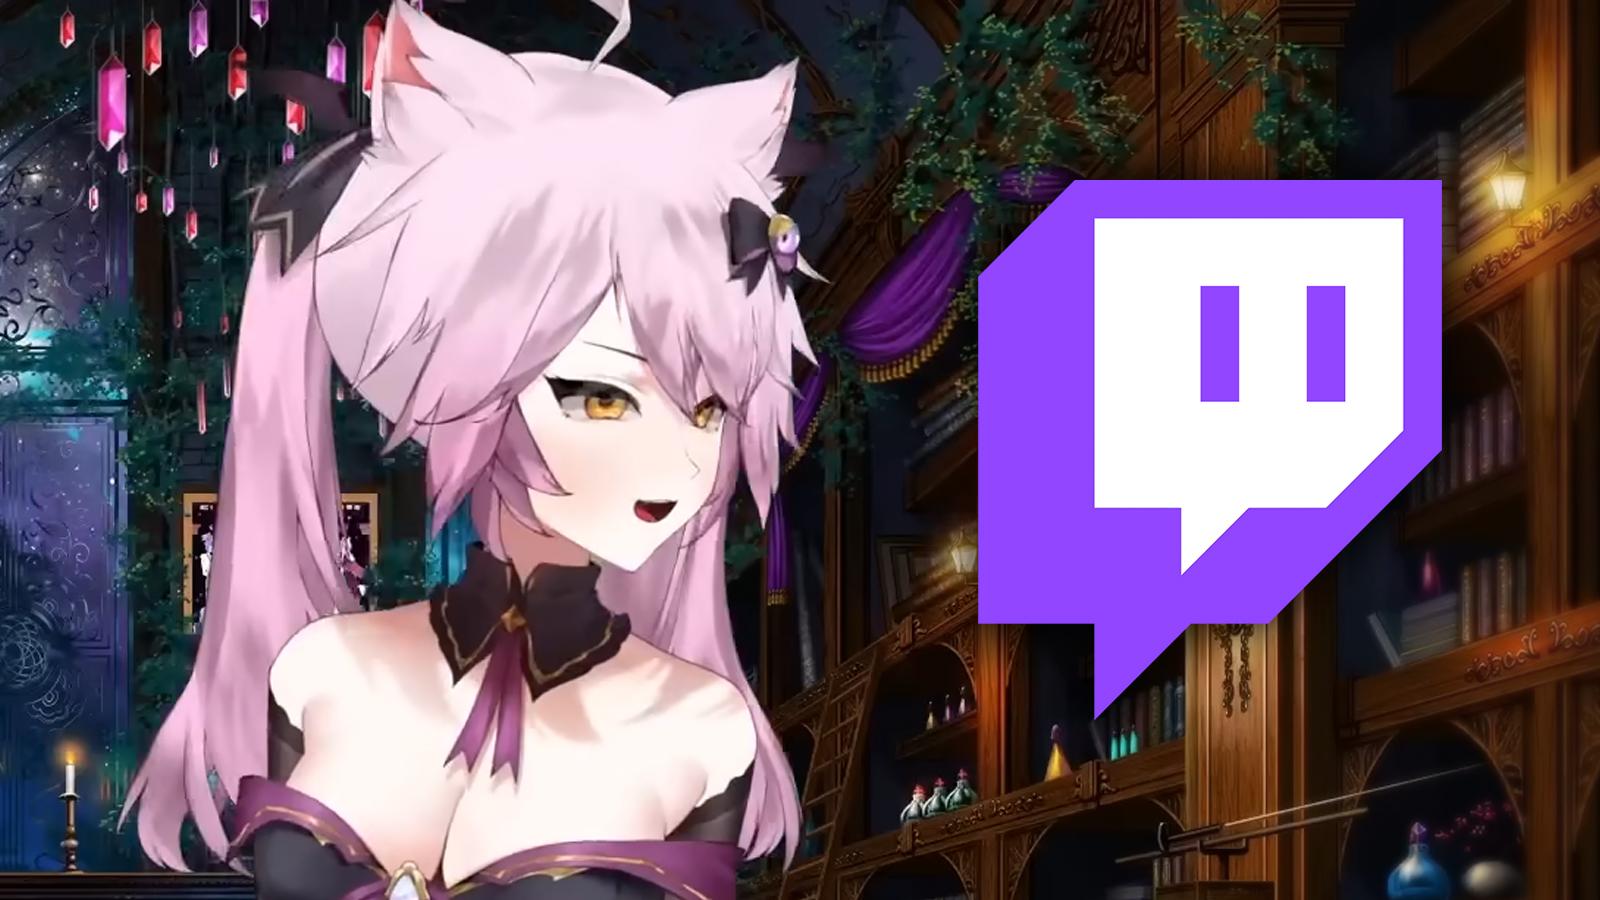 VShojo VTuber Nyanners new outfit looking at twitch logo